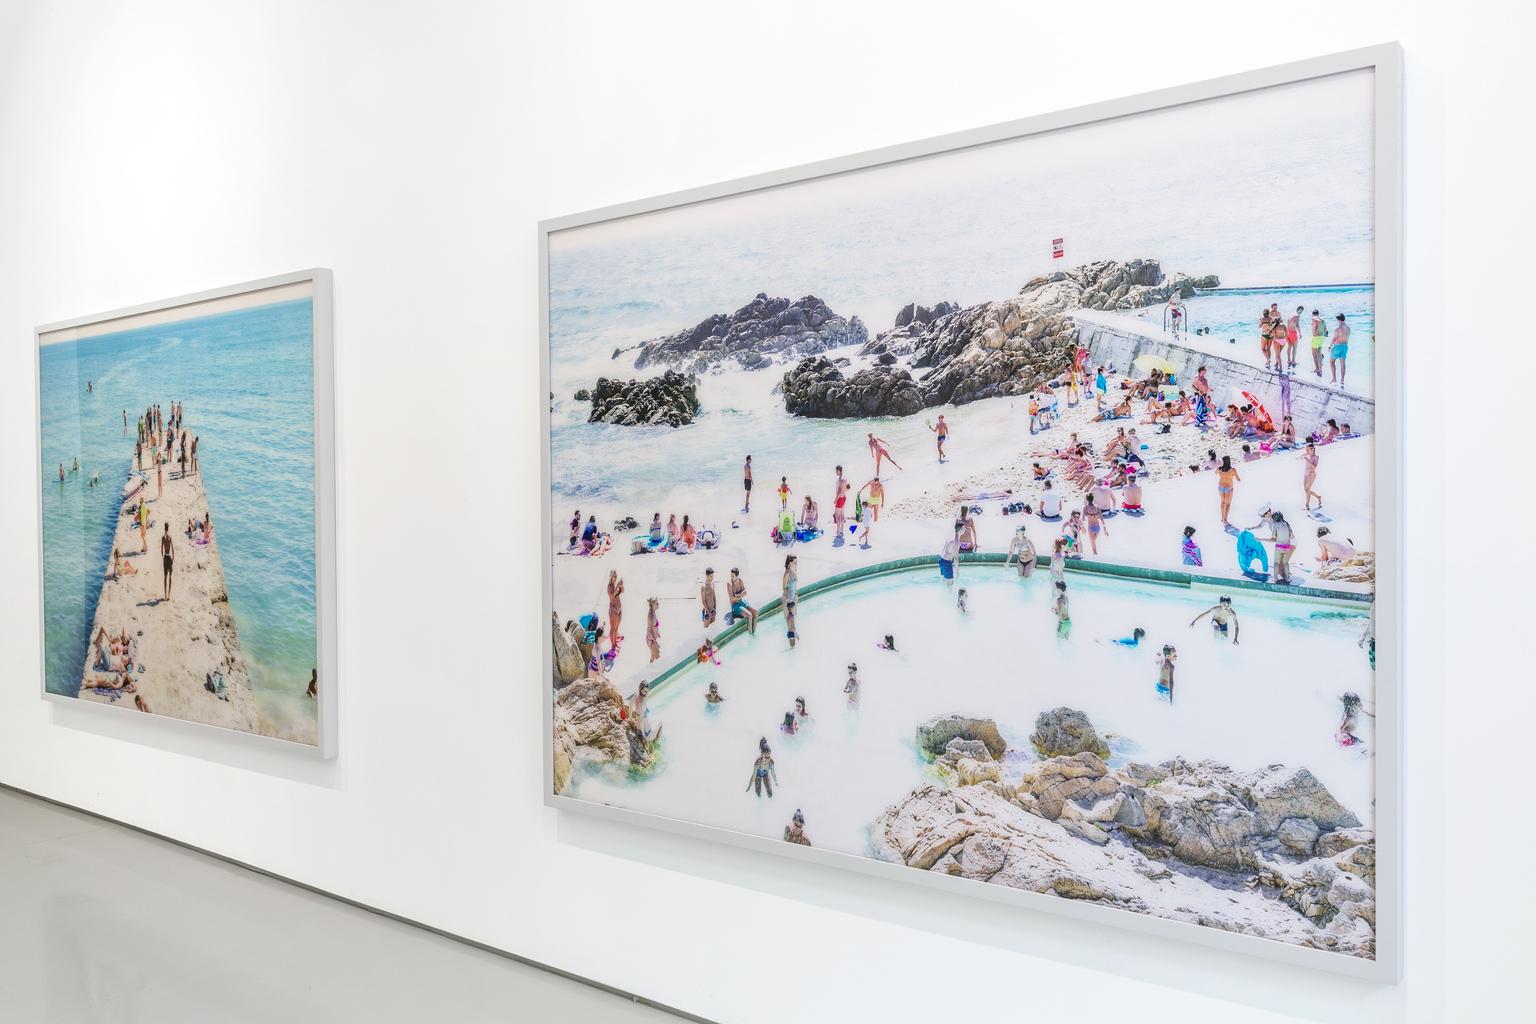 large format beach photograph by Italian photographer Massimo Vitali, renowned for his grand scale topographical observations of the rites and rituals of modern leisure

Cala Conta Point (2016) 

61.25” x 80.95” 
155.60 cm x 205.60 cm 

limited